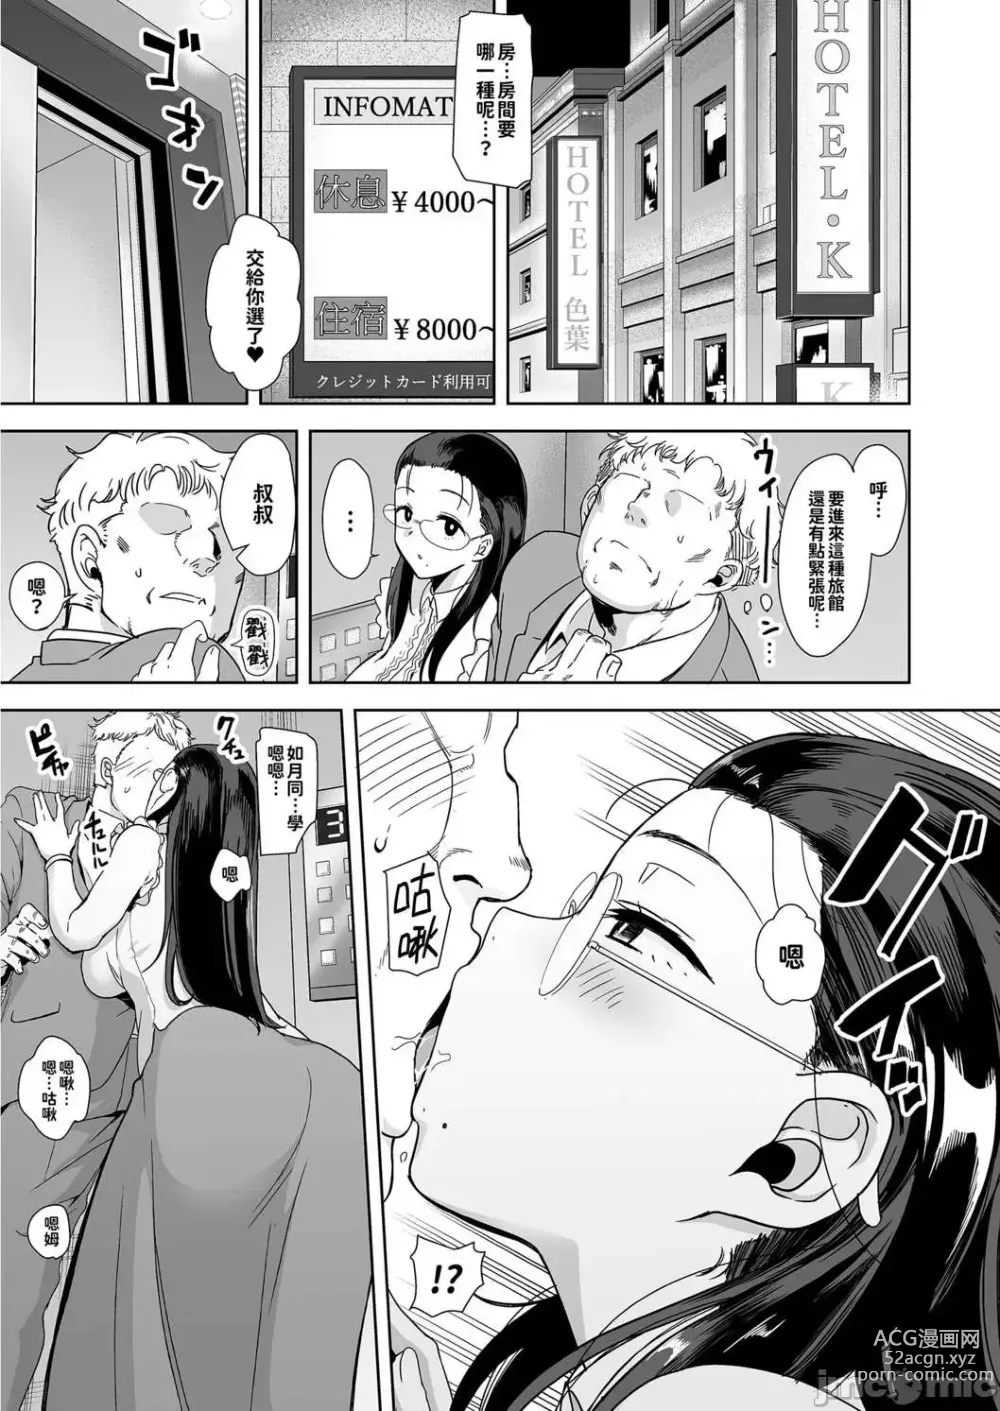 Page 4 of doujinshi Seika Girls Academys Officially Approved Prostitute Man 1 + 2